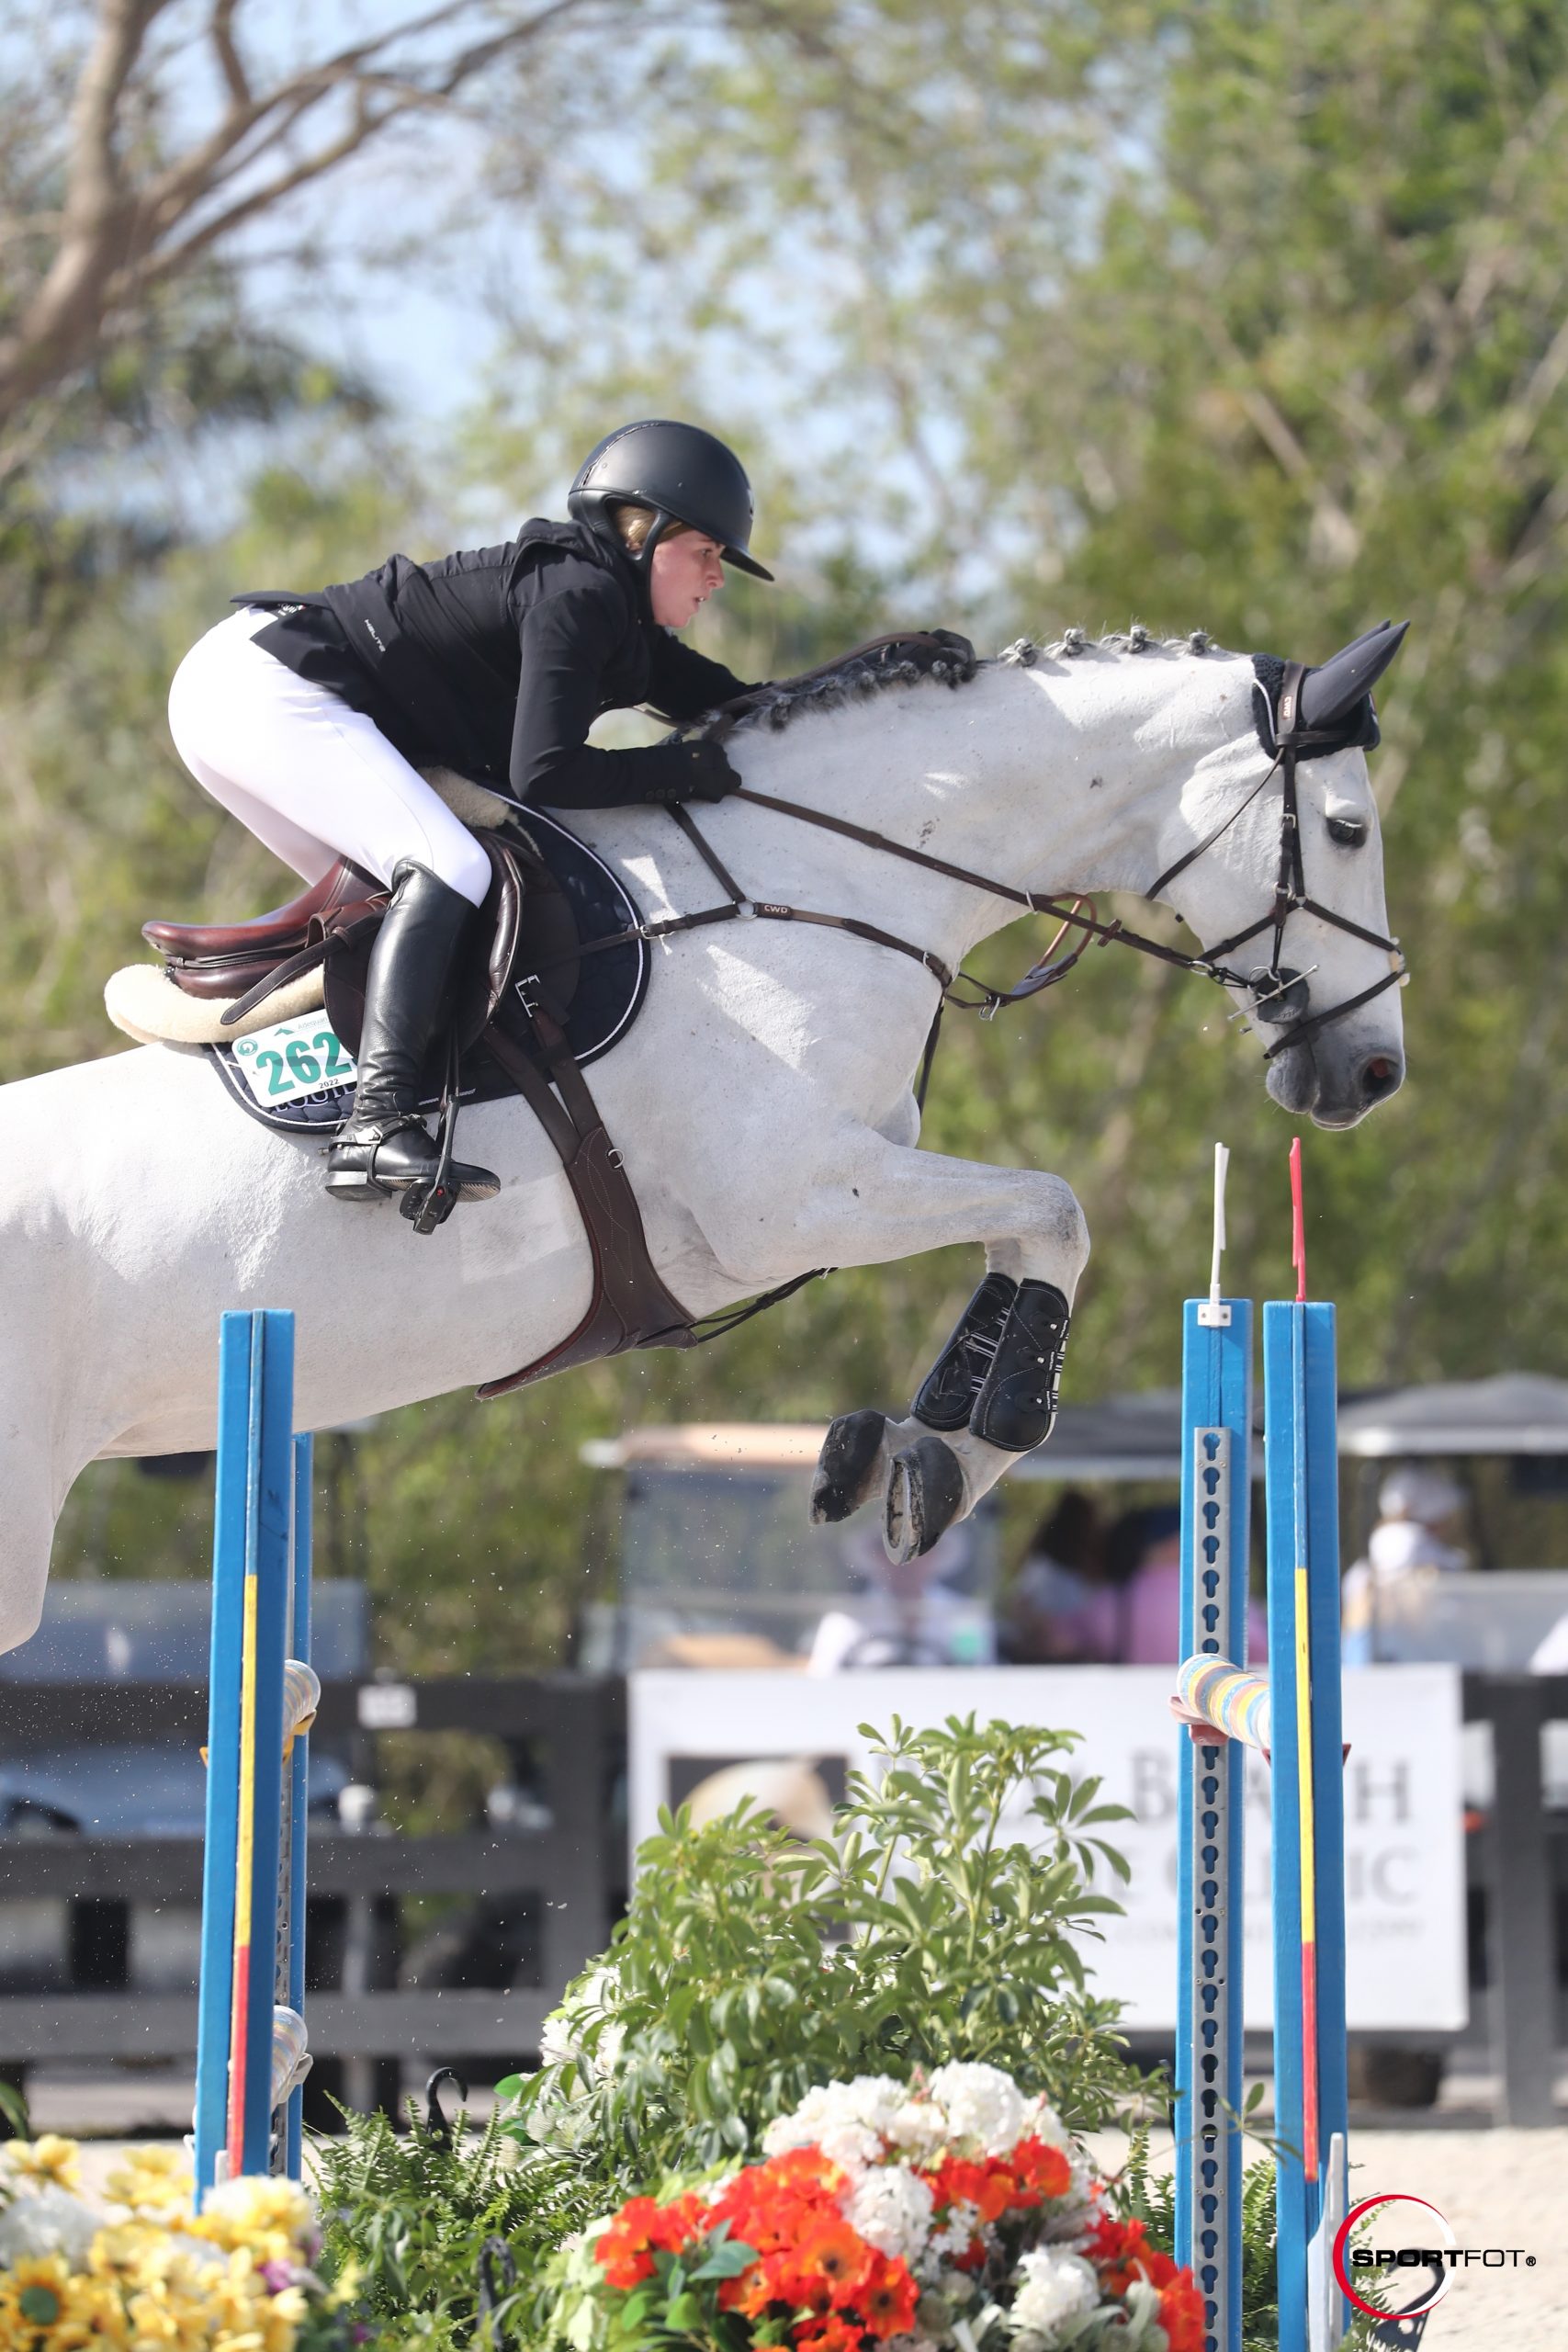 Reference Fata Morgana and Taylor Madden looking good together in today’s schooling Jumper during WEF 10!